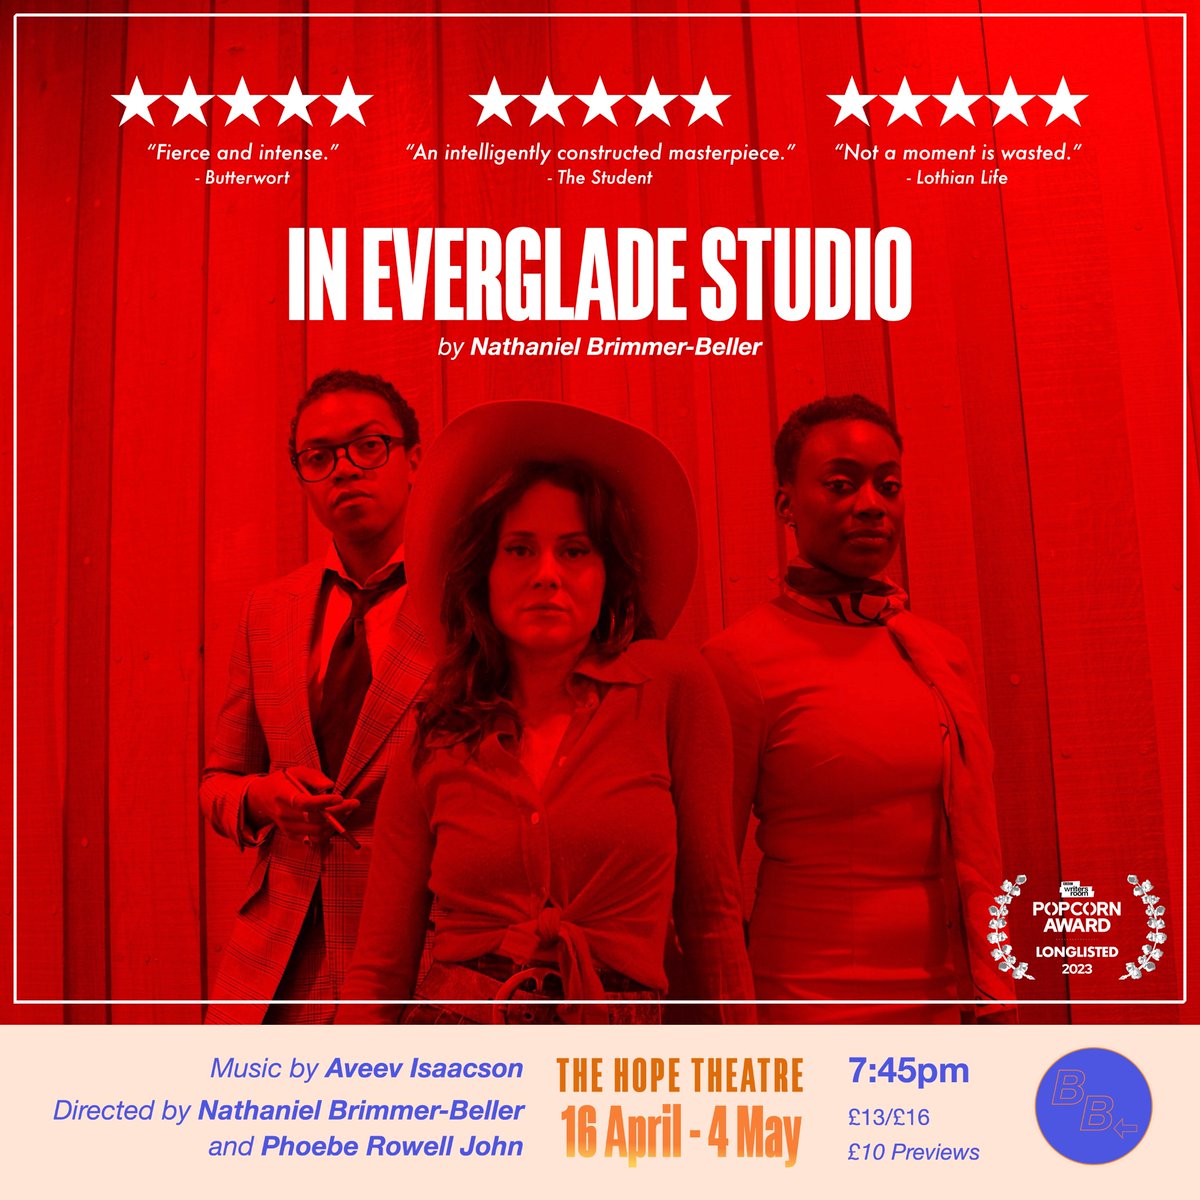 Last performance of In Everglade Studio's run at @TheHopeTheatre tonight. Saying goodbye to August 1974... Thank you to our audiences ❤️ Get tickets to this 'unique, powerful, and stunningly written' play, and join us there for our closing night: thehopetheatre.com/productions/in…